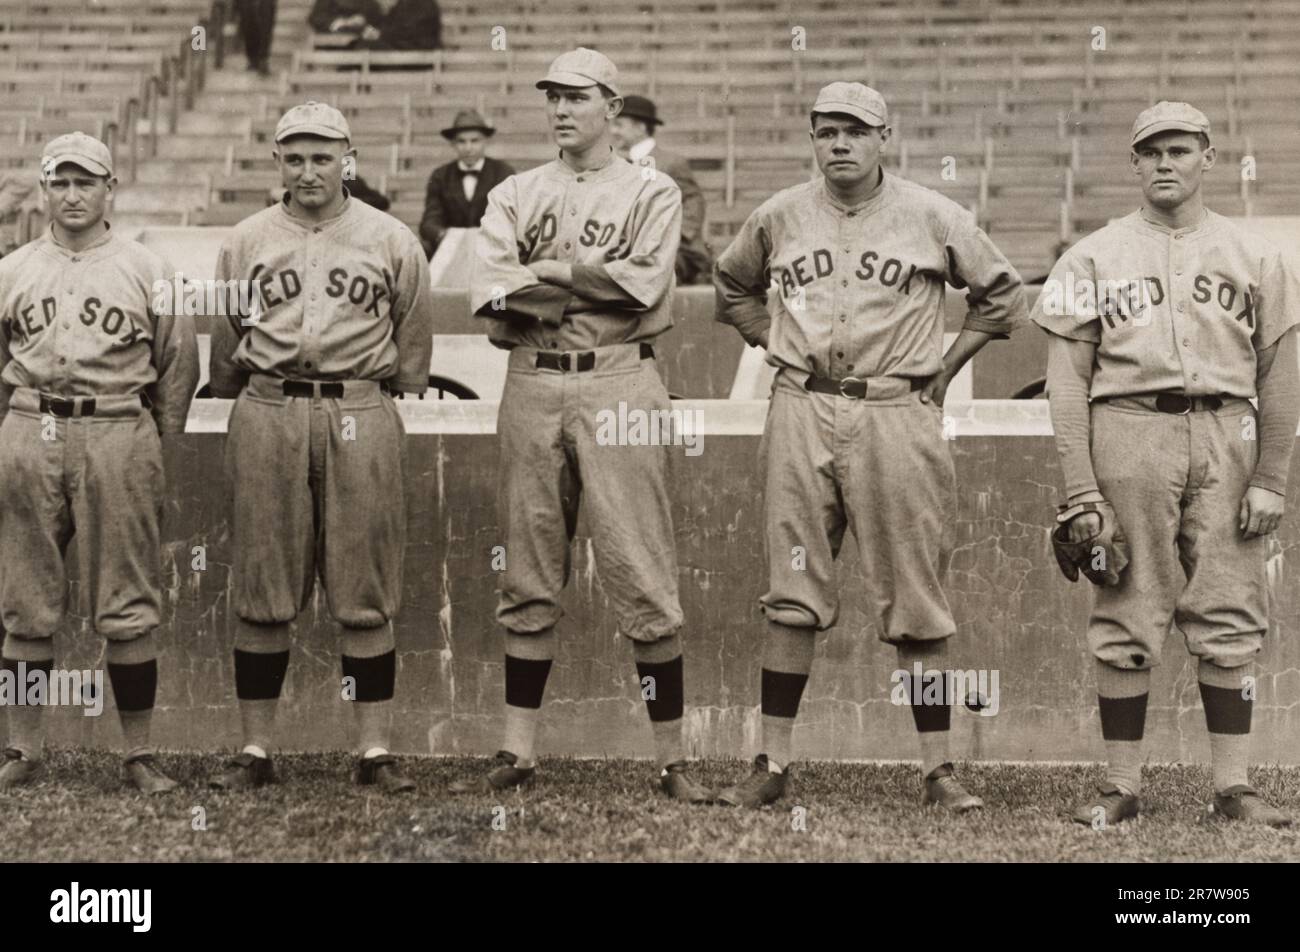 Babe Ruth and other Red Sox pitchers 1915 Stock Photo